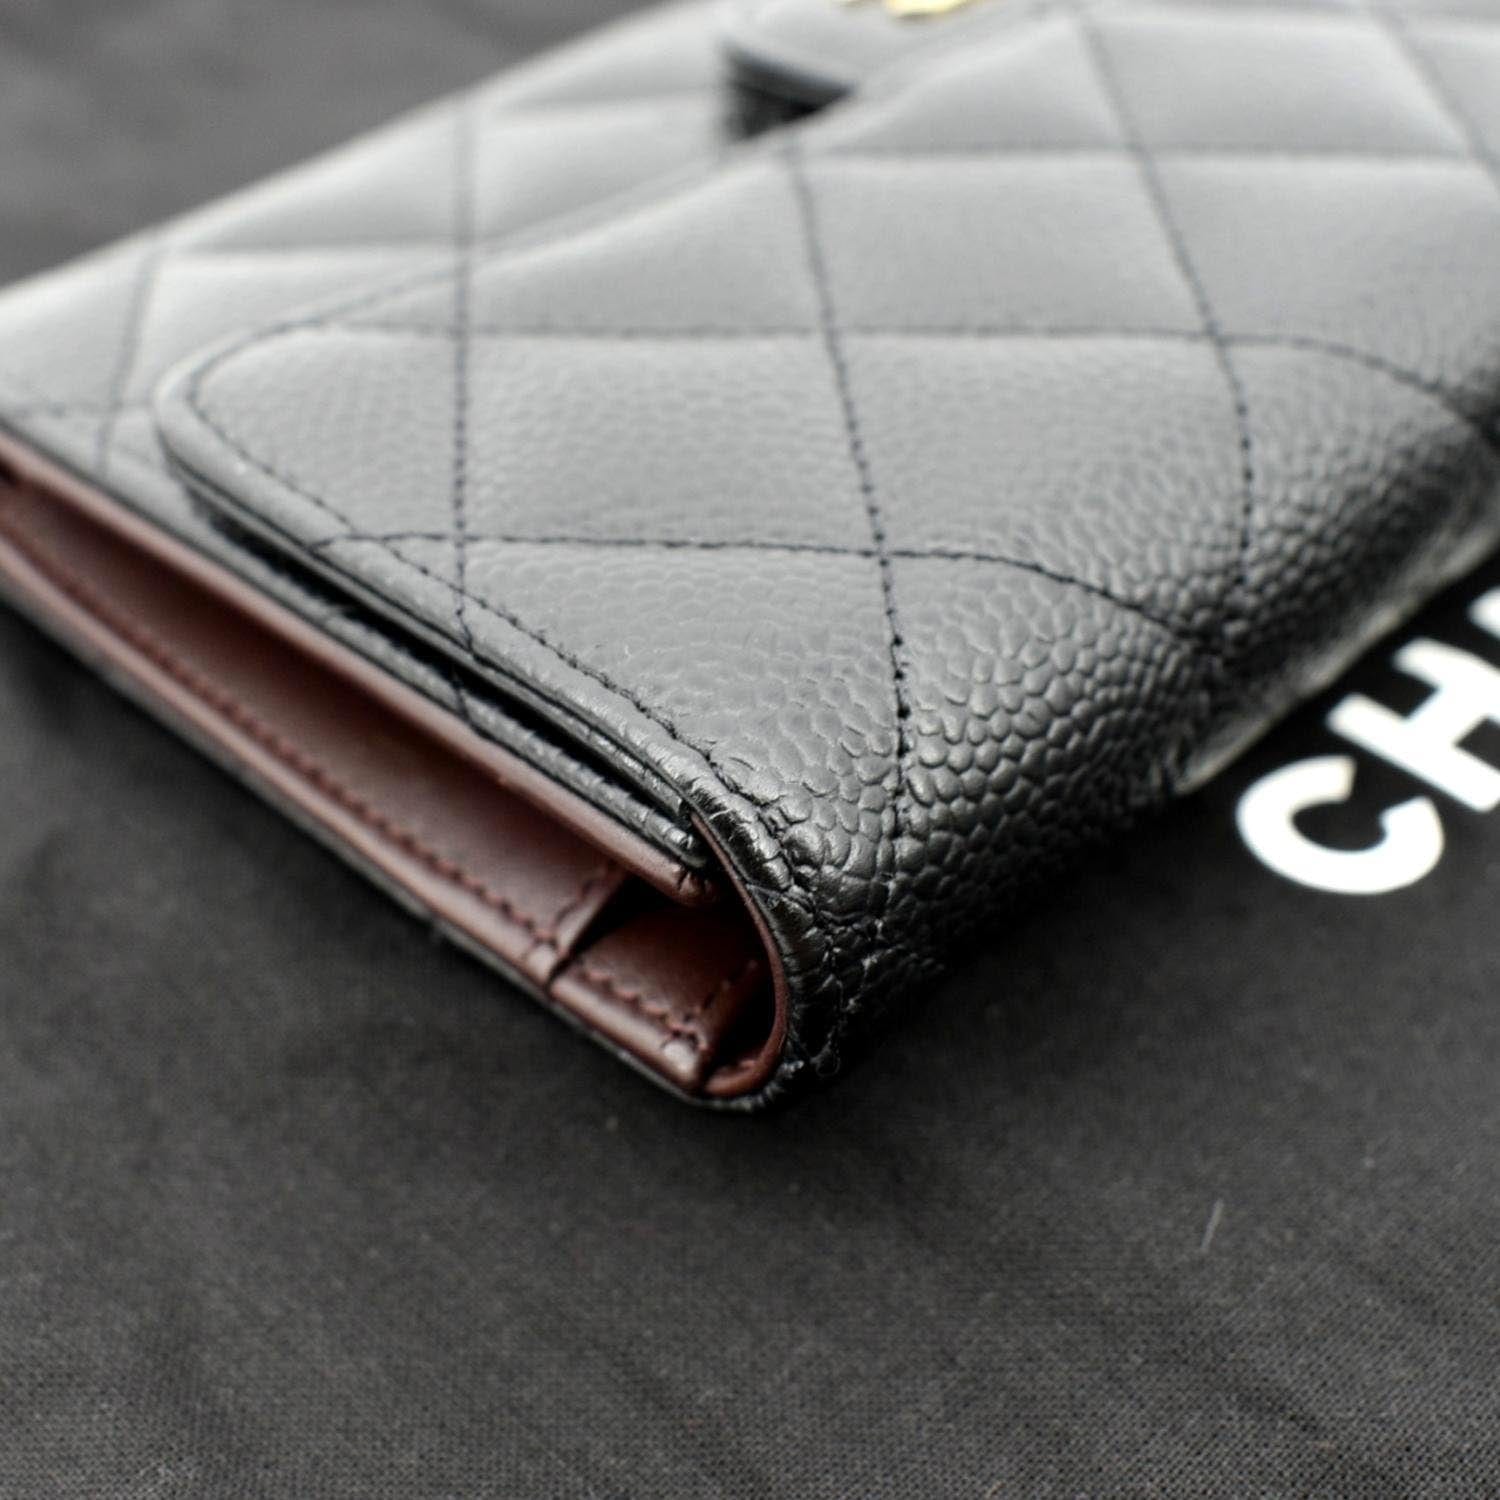 Chanel Flap Quilted Caviar Wallet in Black color